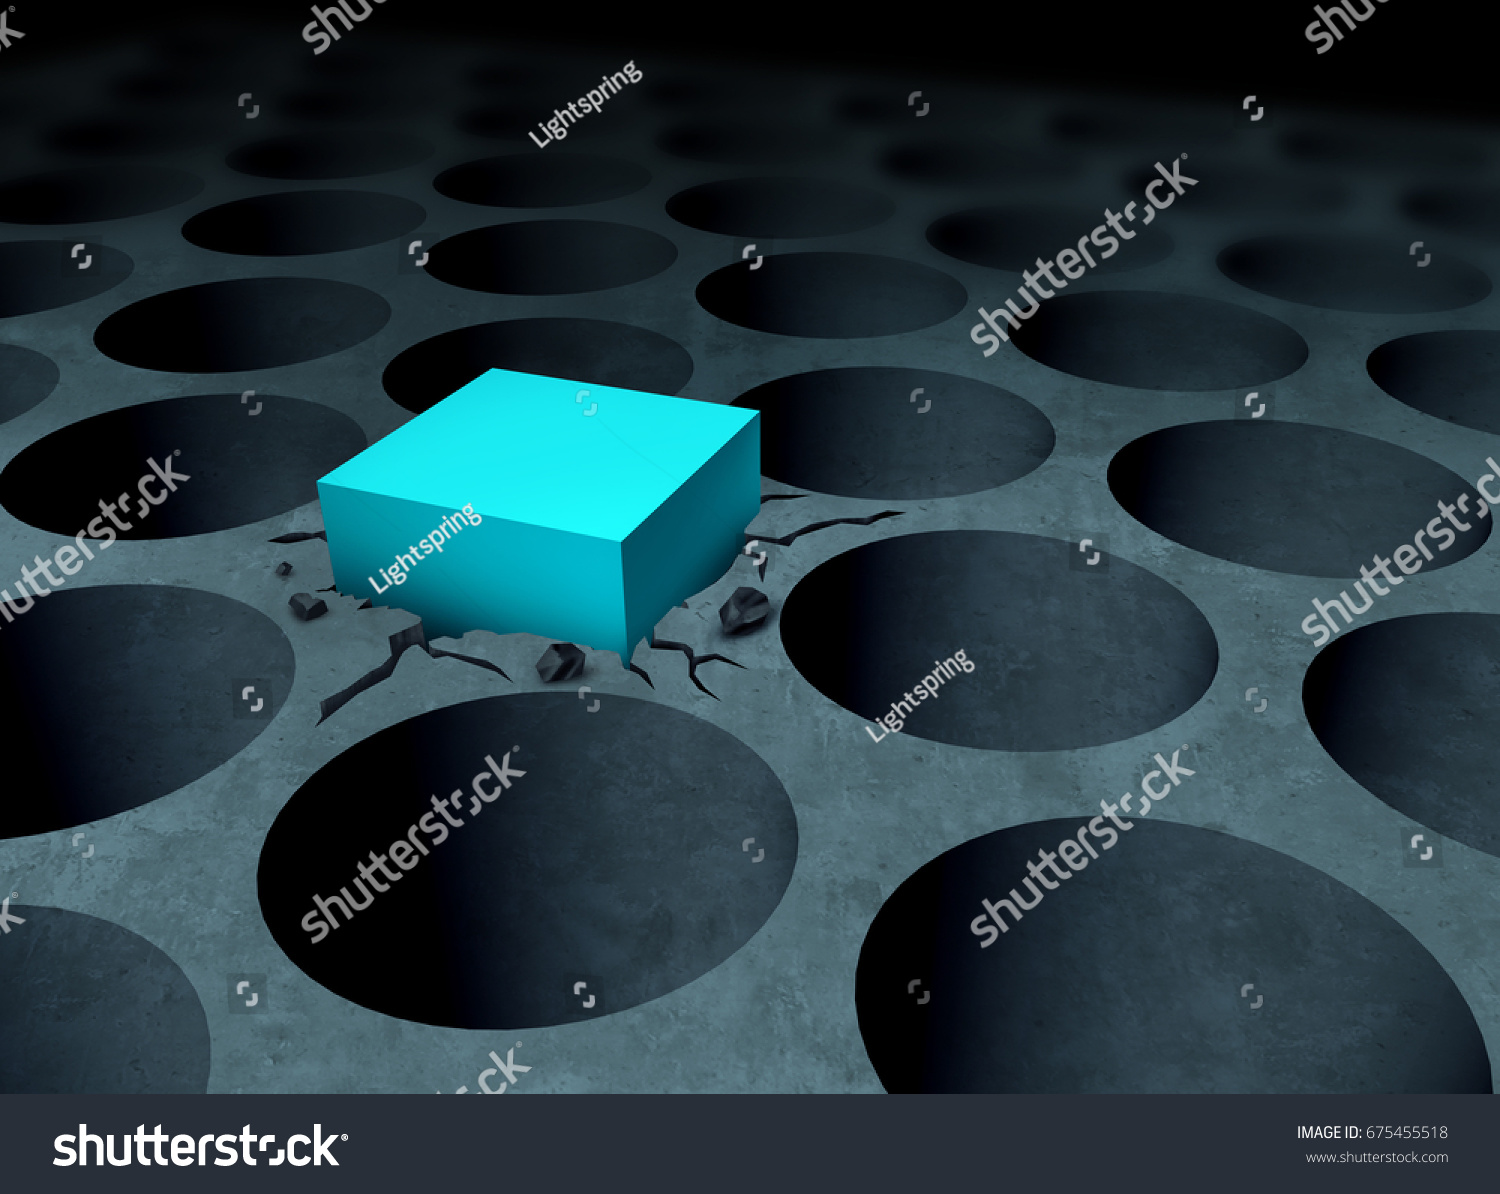 Adversity strategy concept making it work business idea as a square peg forced into a round hole as a success and determination metaphor as a 3D illustration.